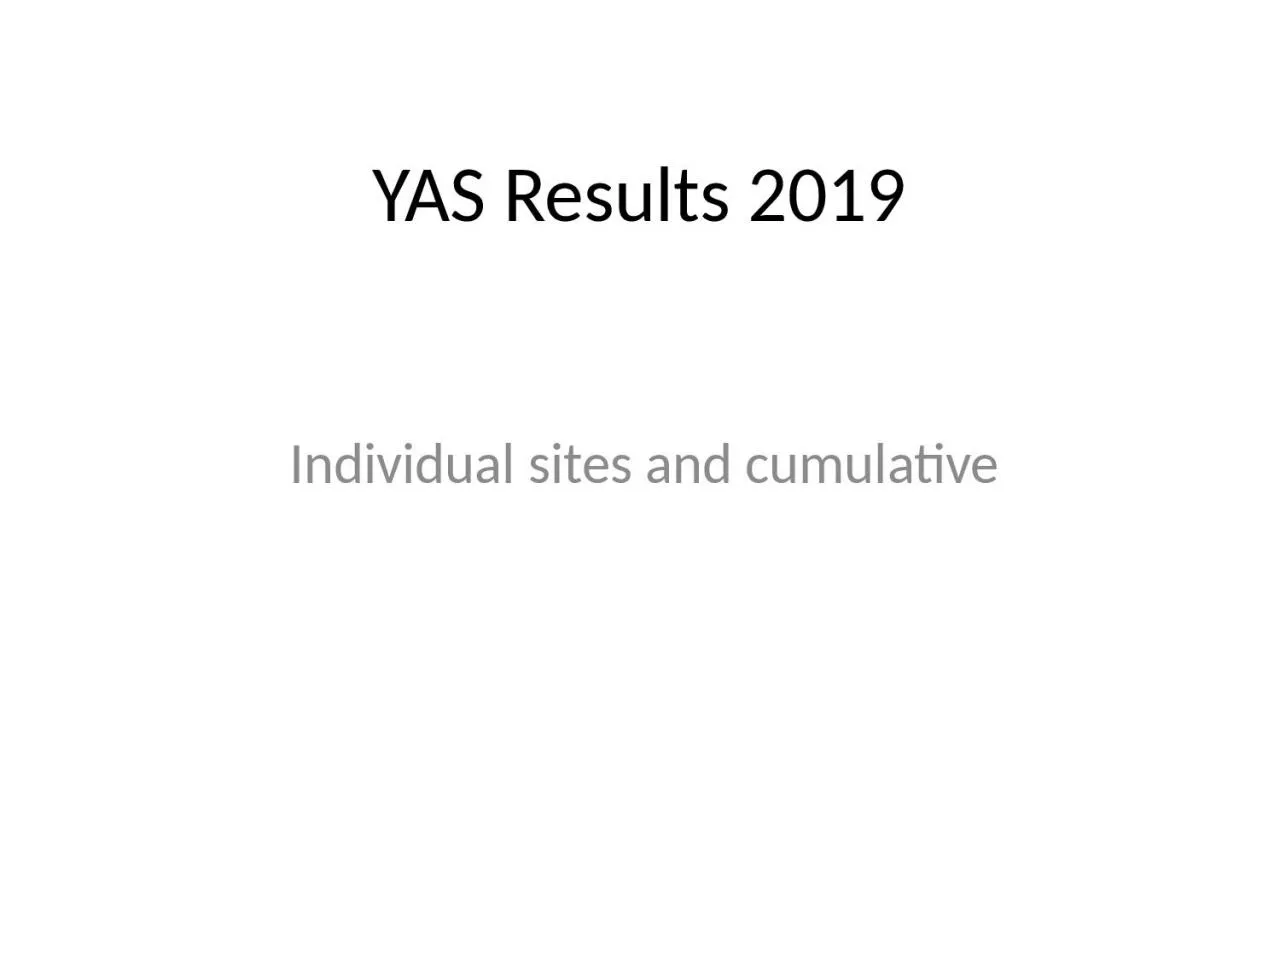 YAS Results 2019 Individual sites and cumulative